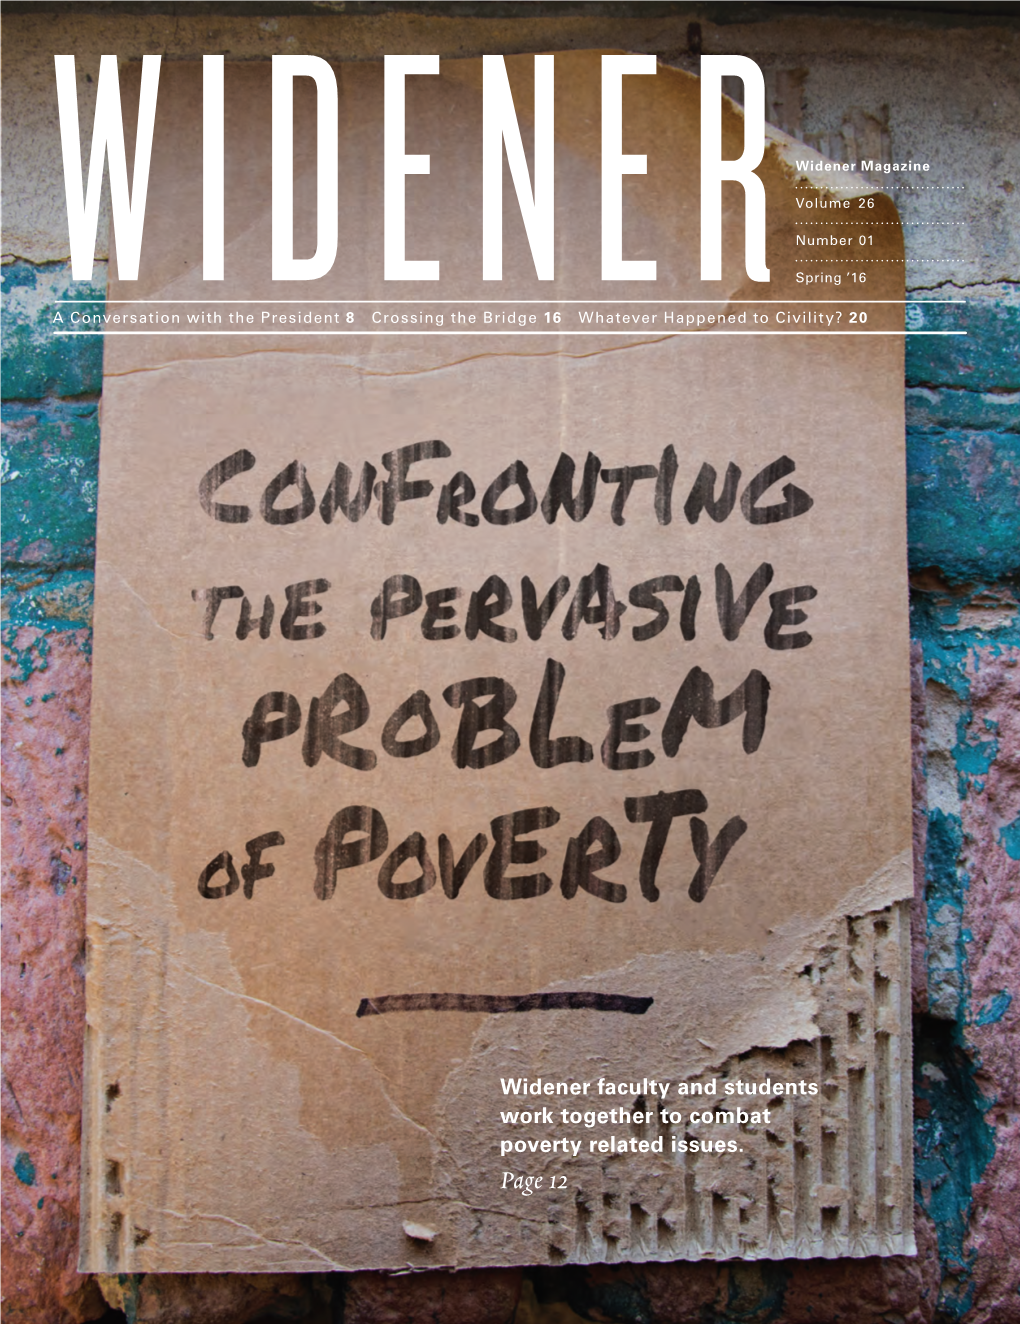 Page 12 on the COVER the City of Philadelphia Has the Highest Poverty Level of Any Major City in the United States